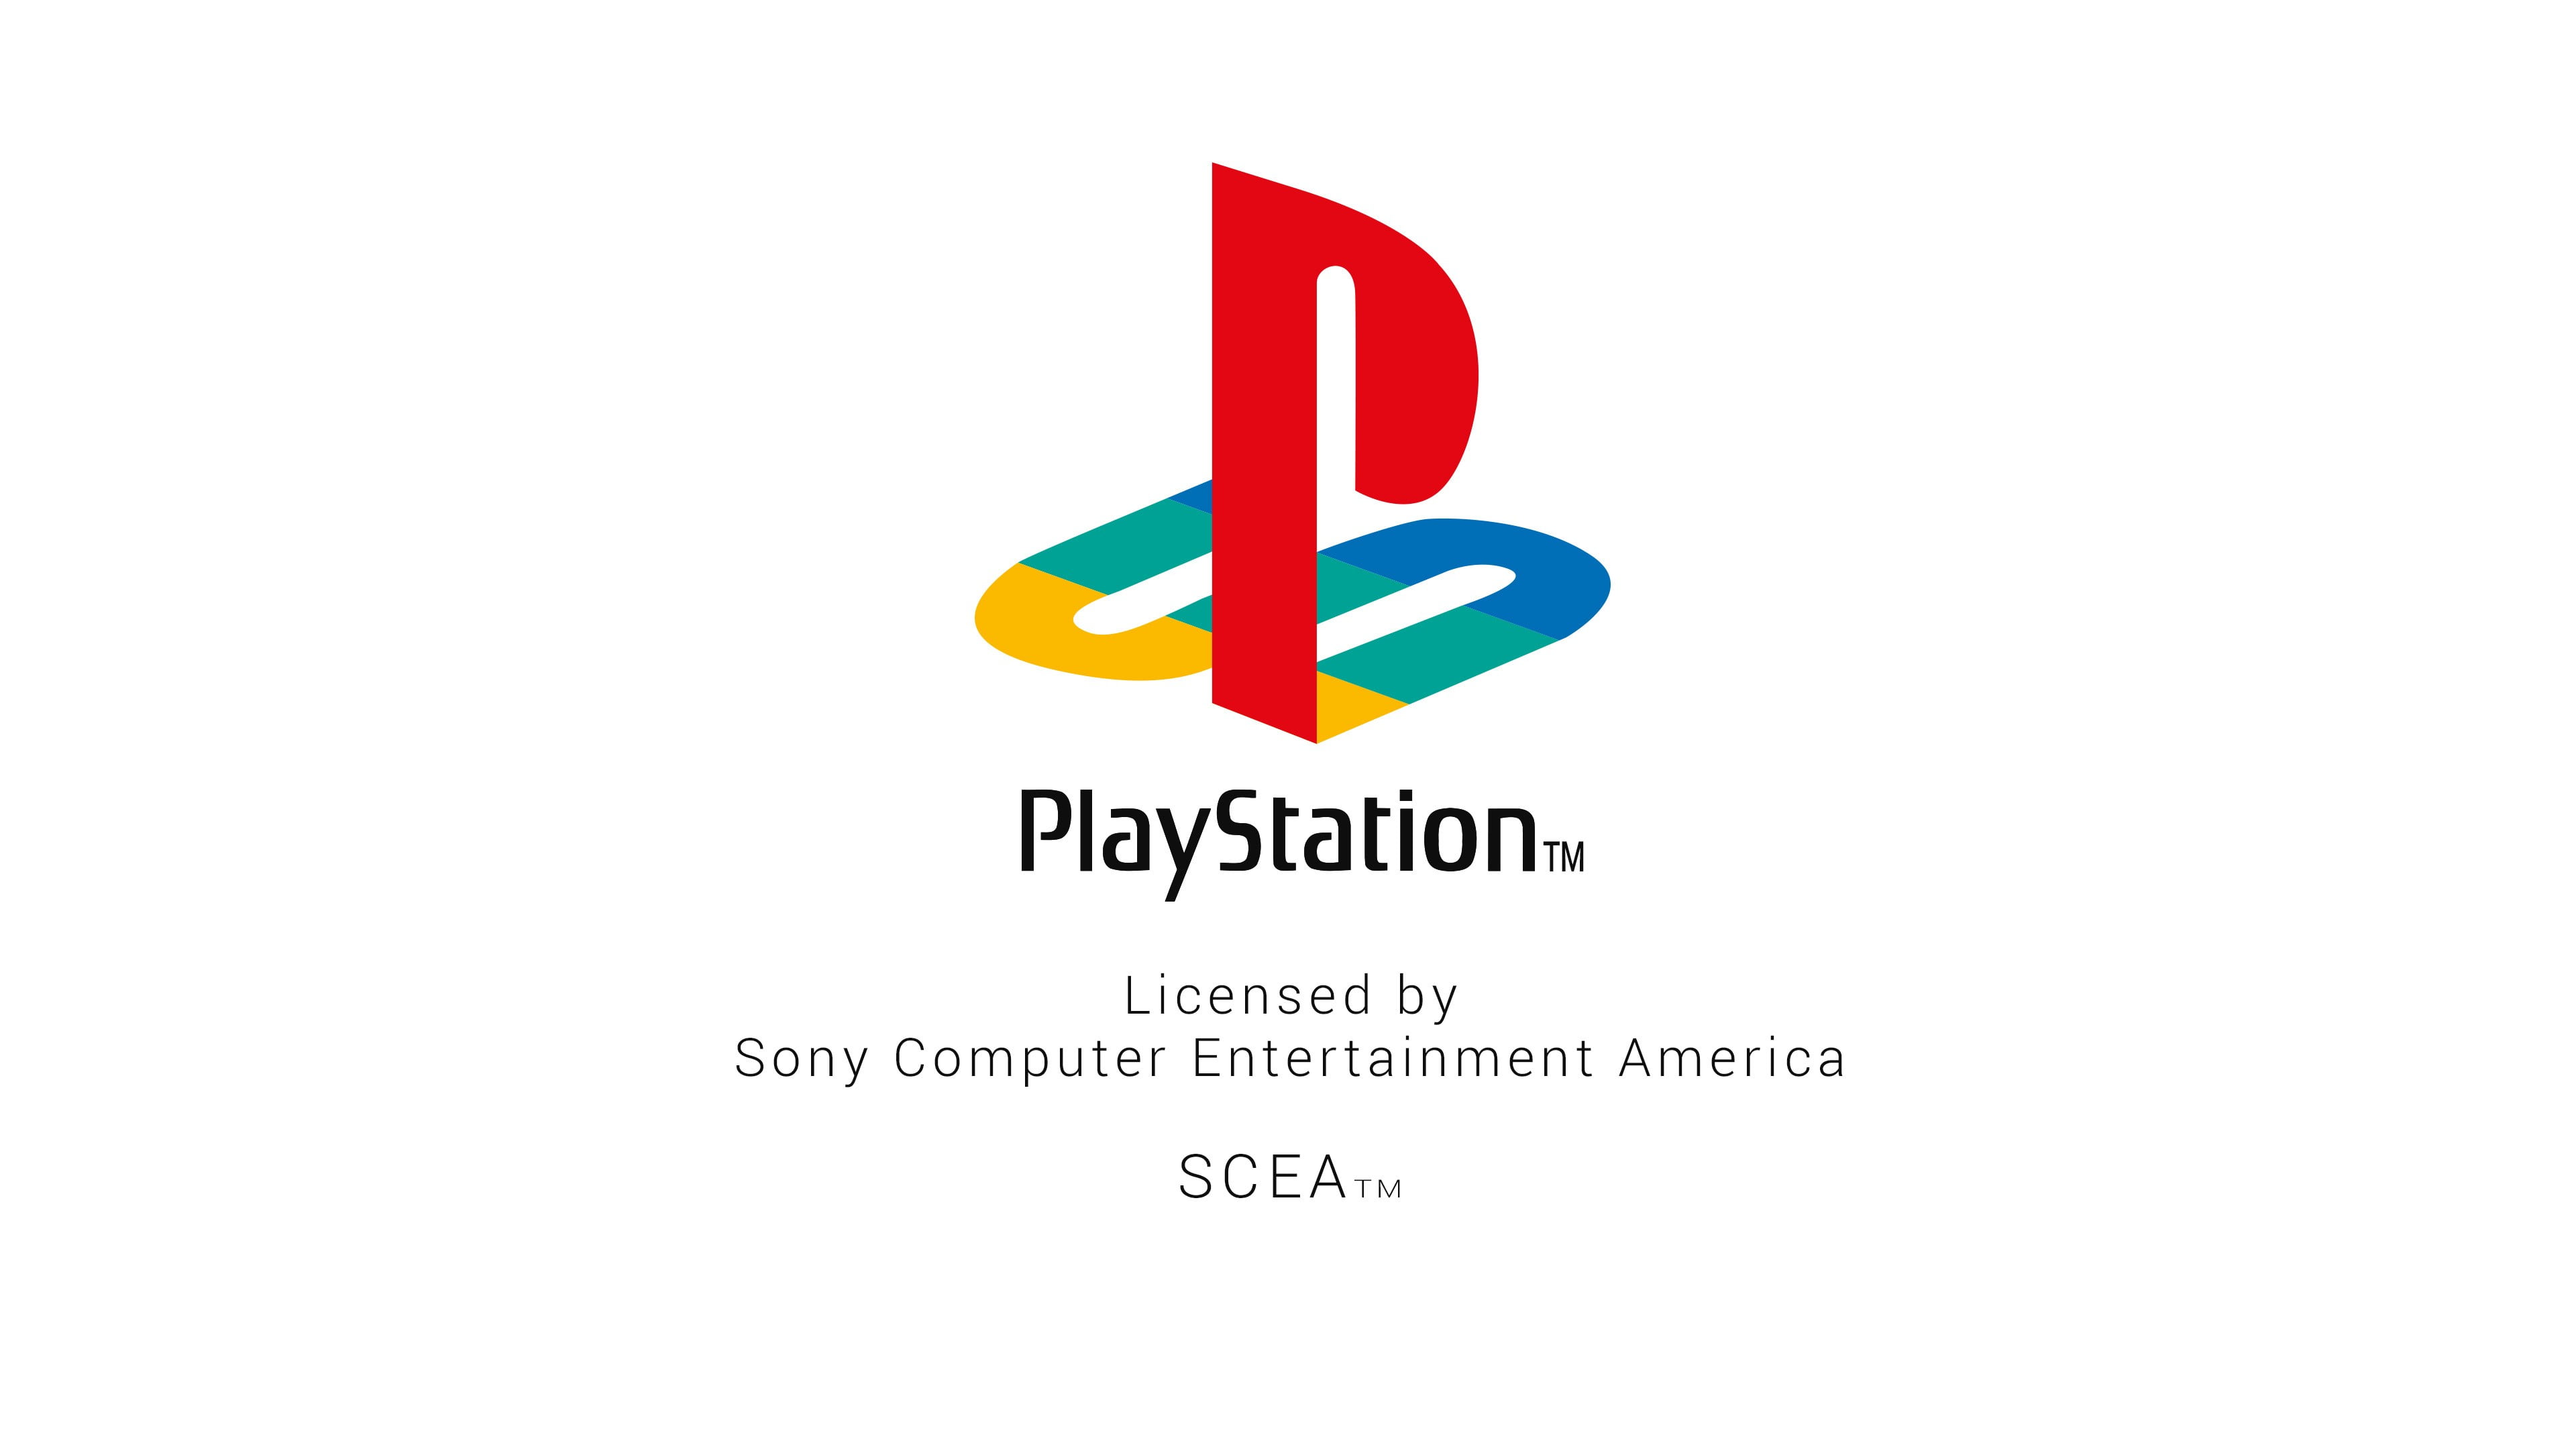 Wallpaper Playstation 4 logo Sony 1920x1080 Full HD 2K Picture Image